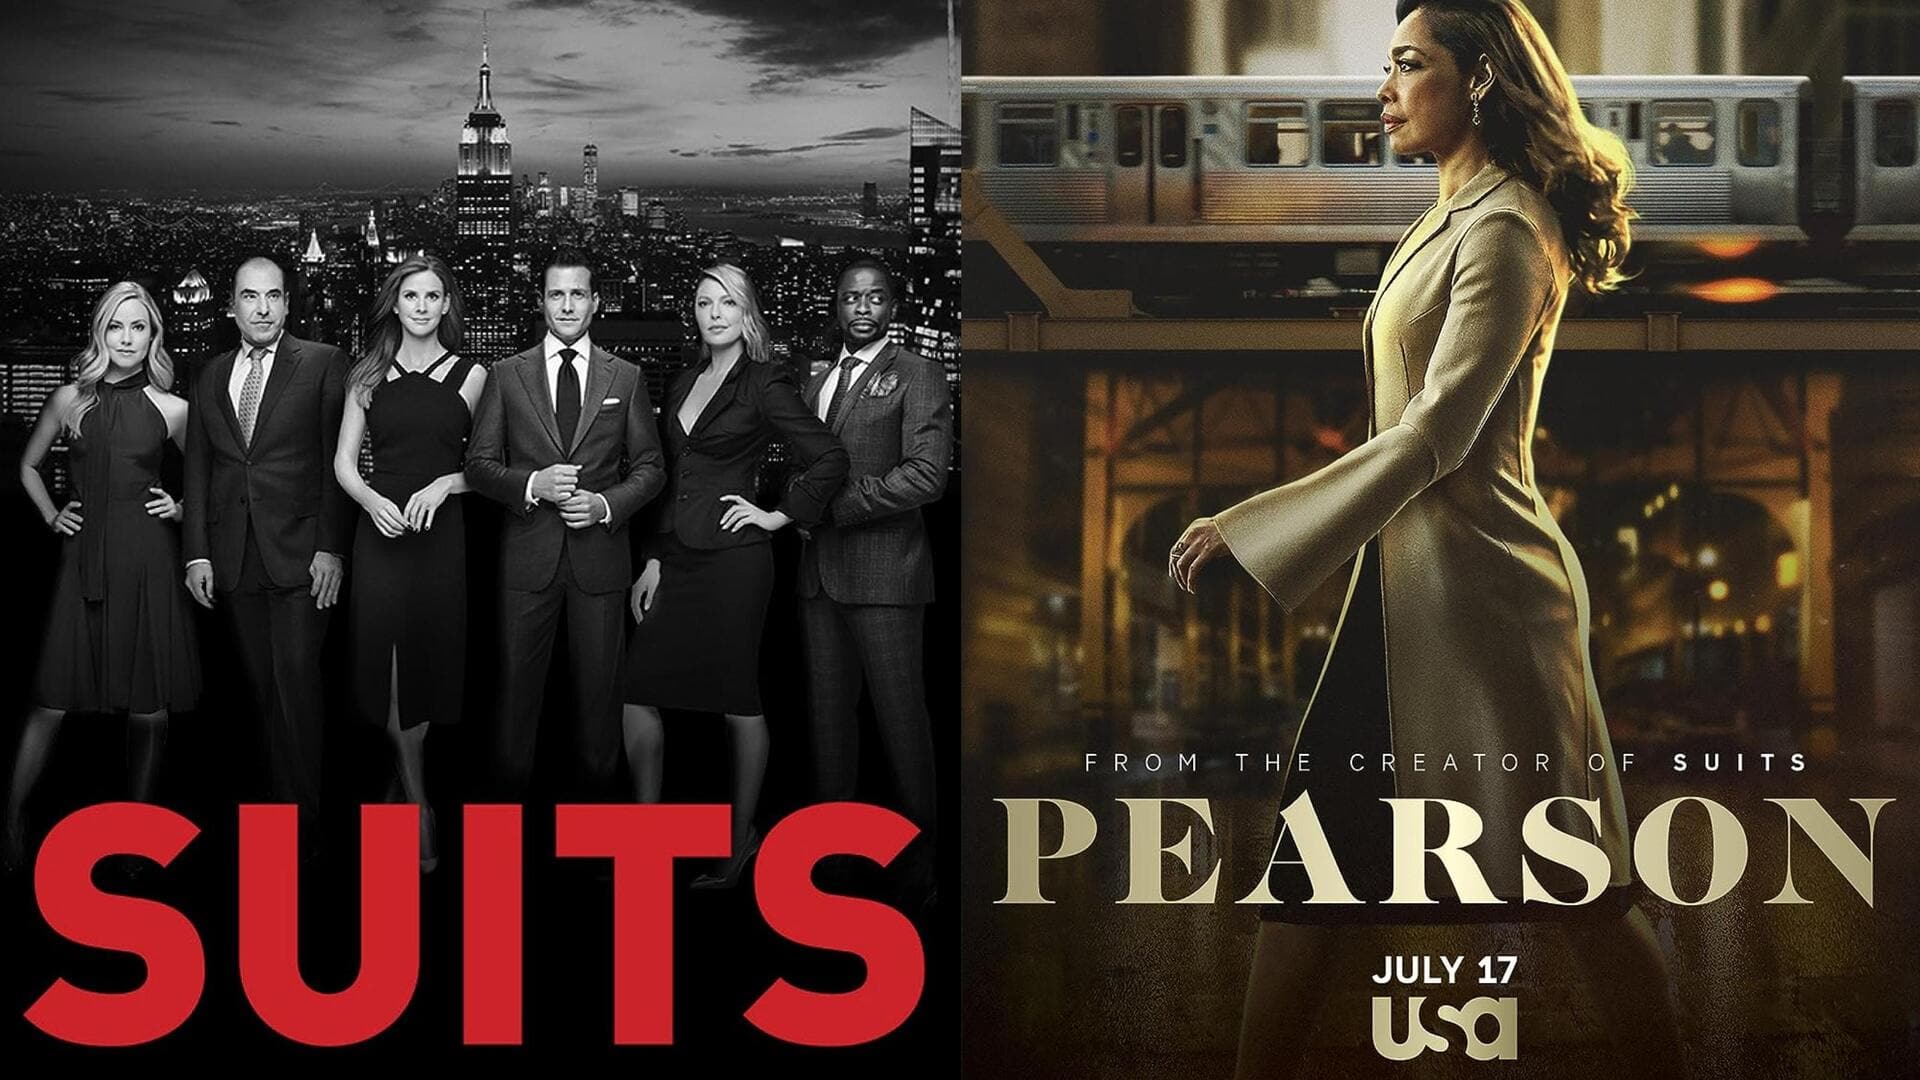 'Pearson': Why you should watch the 'Suits' spin-off